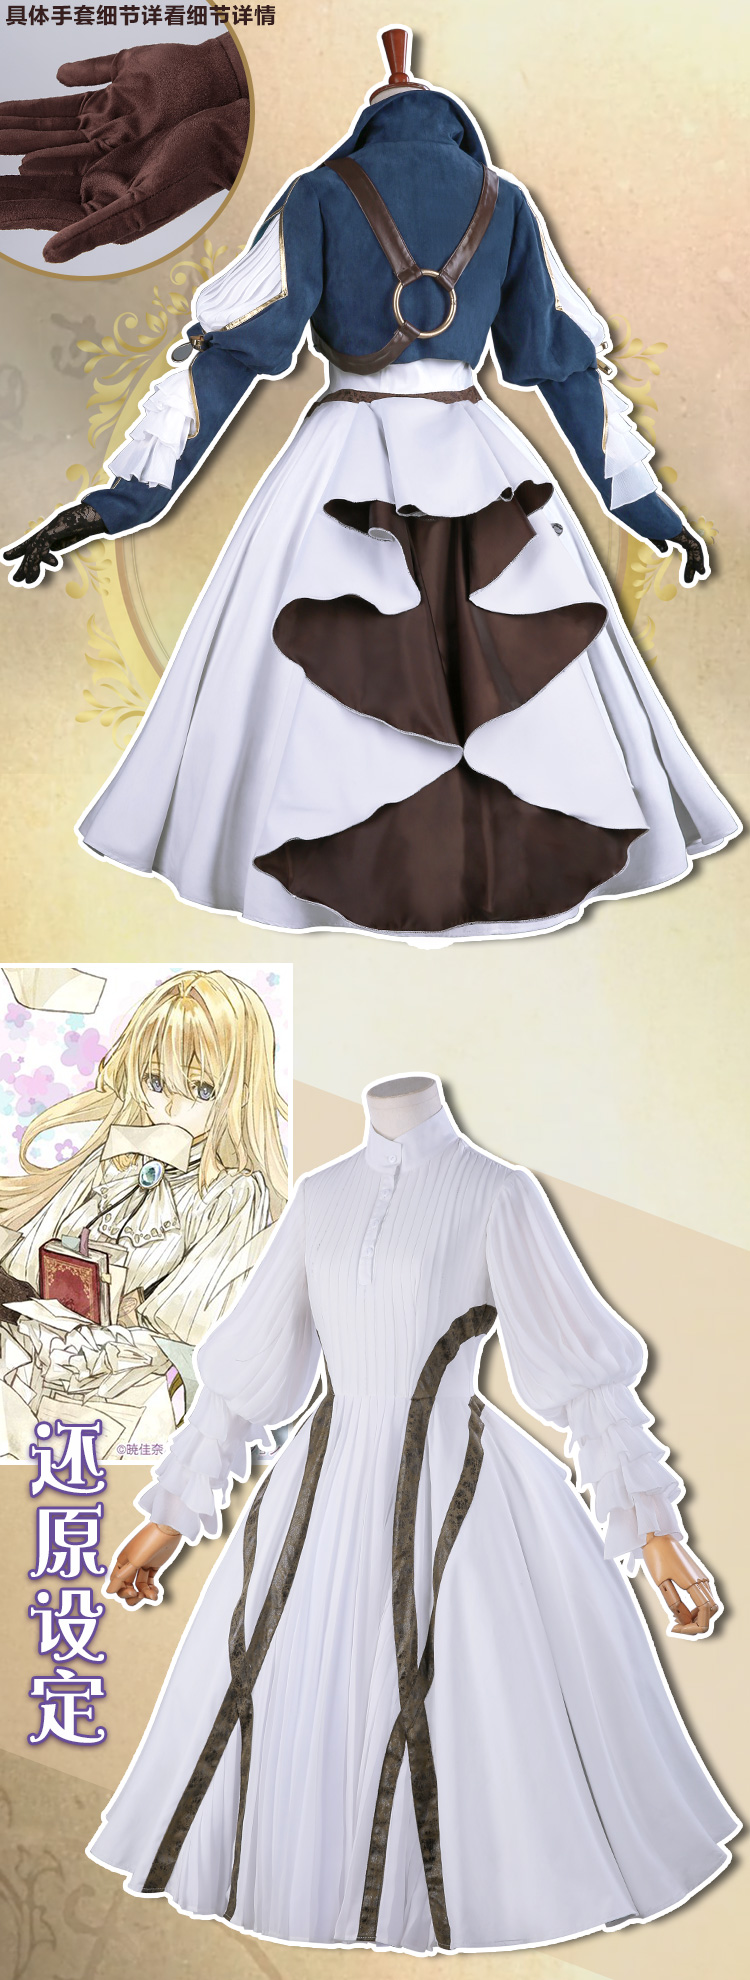 Anime Violet Evergarden Cosplay Costume Caster  s m l